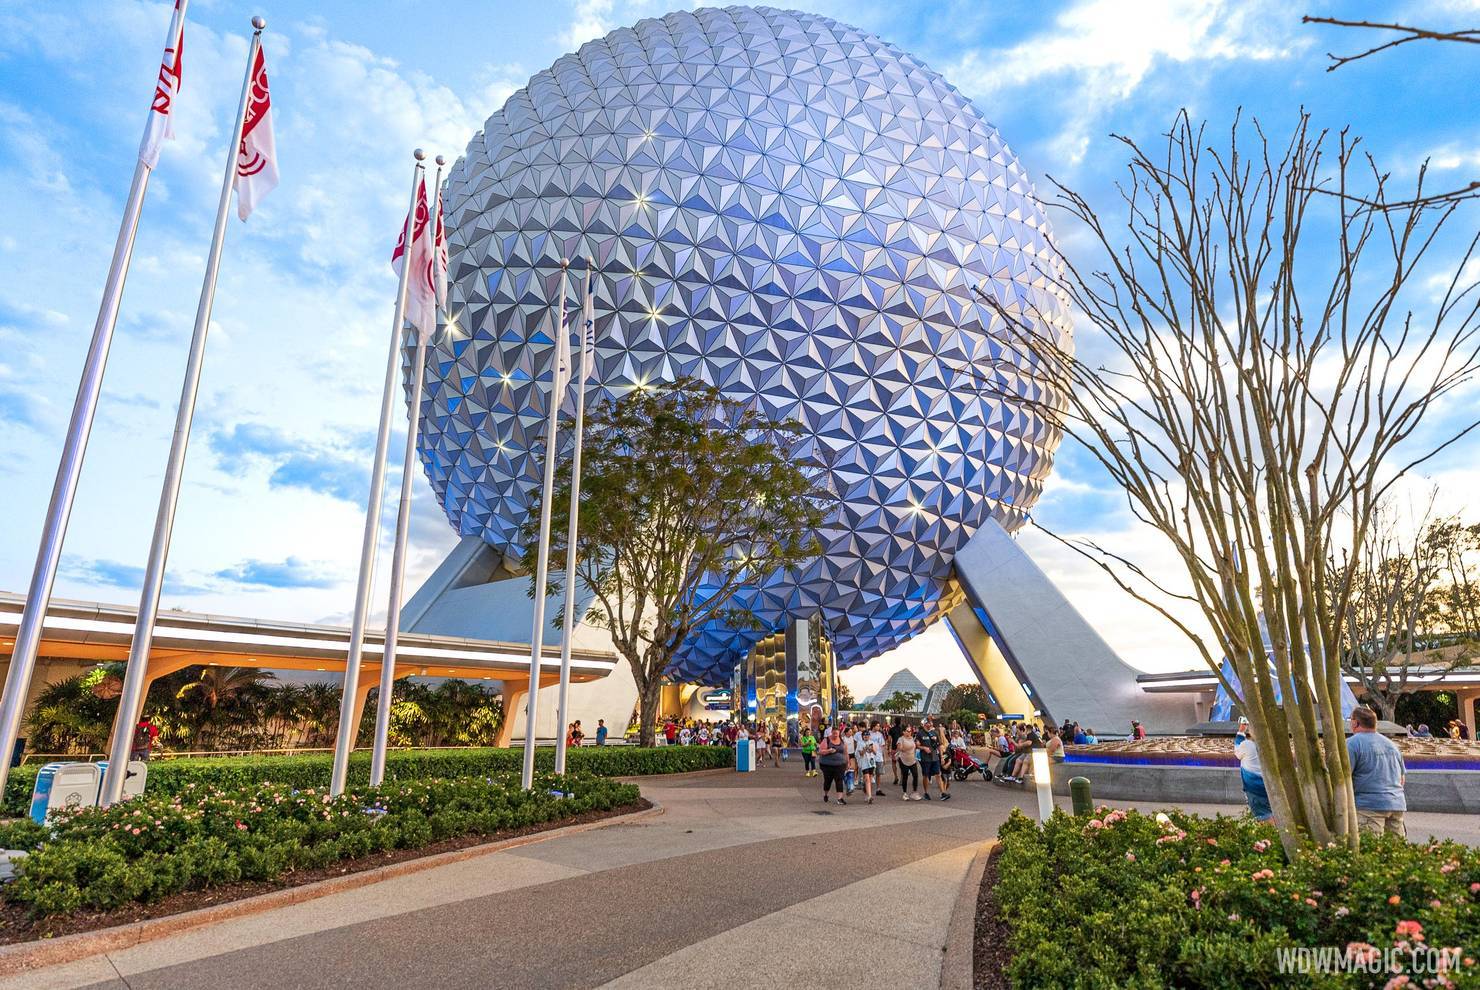 Walt Disney World Cancelling Park Pass Reservations Not Connected to Theme  Park Admission - WDW News Today